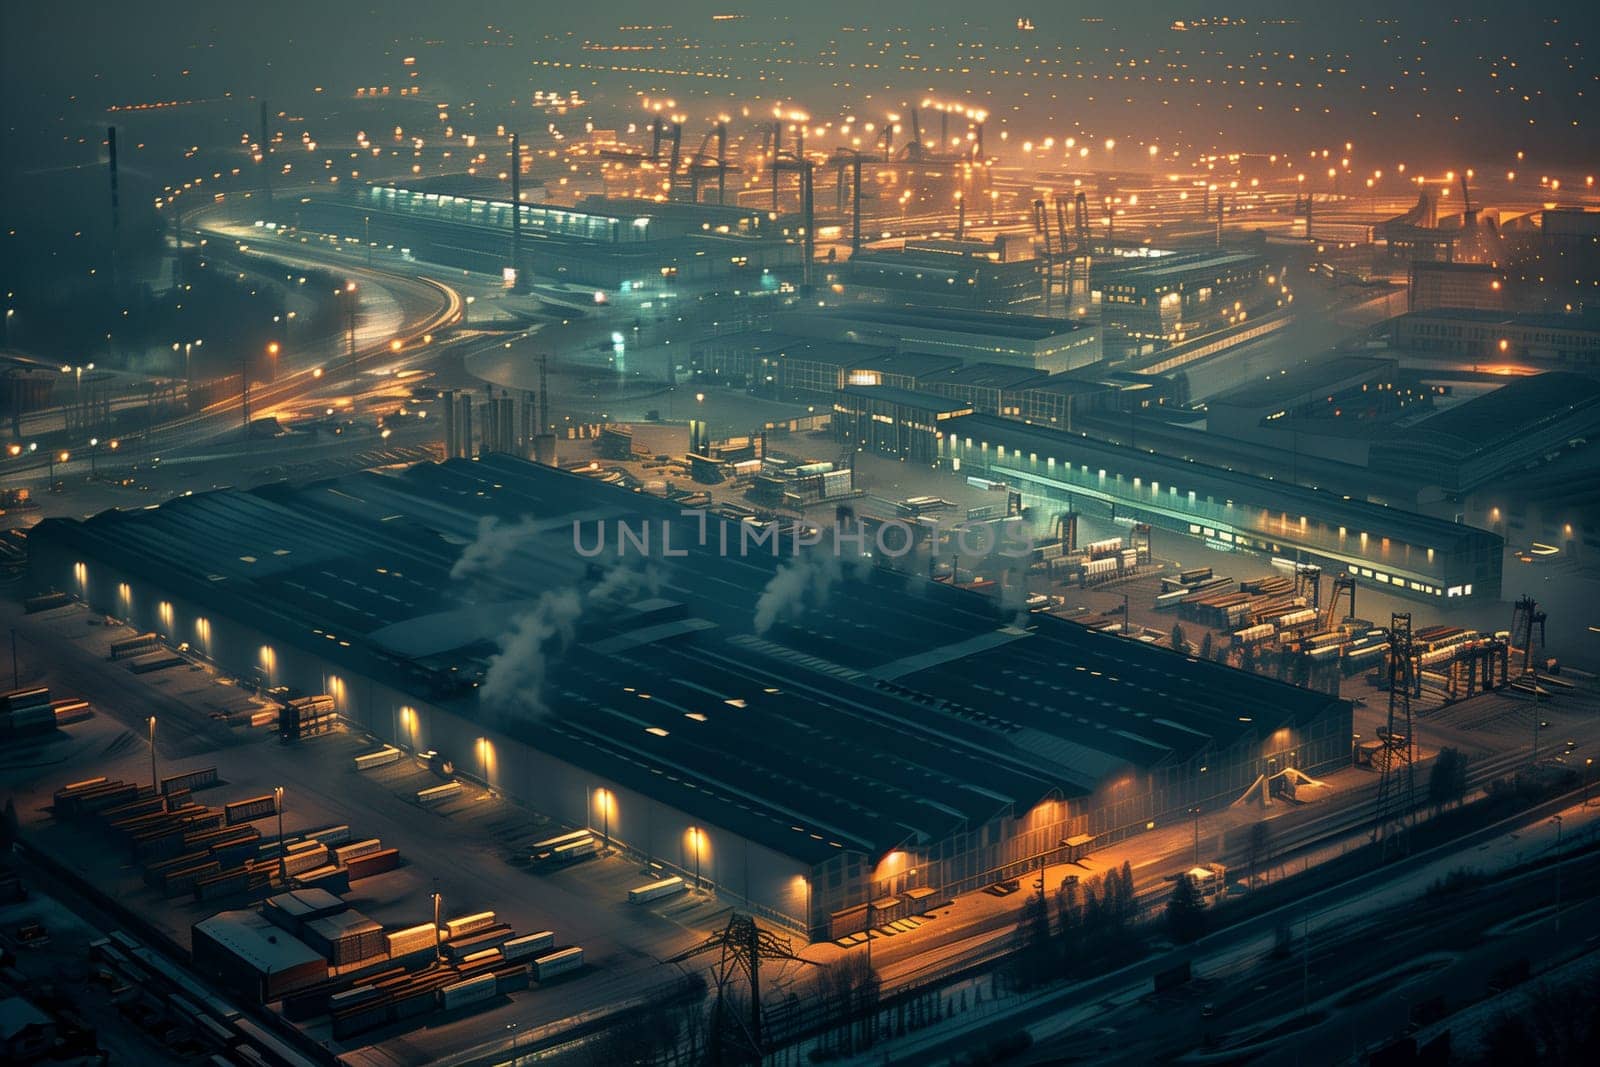 Aerial perspective of a factory illuminated at night, showcasing the industrial structures and machinery in operation.